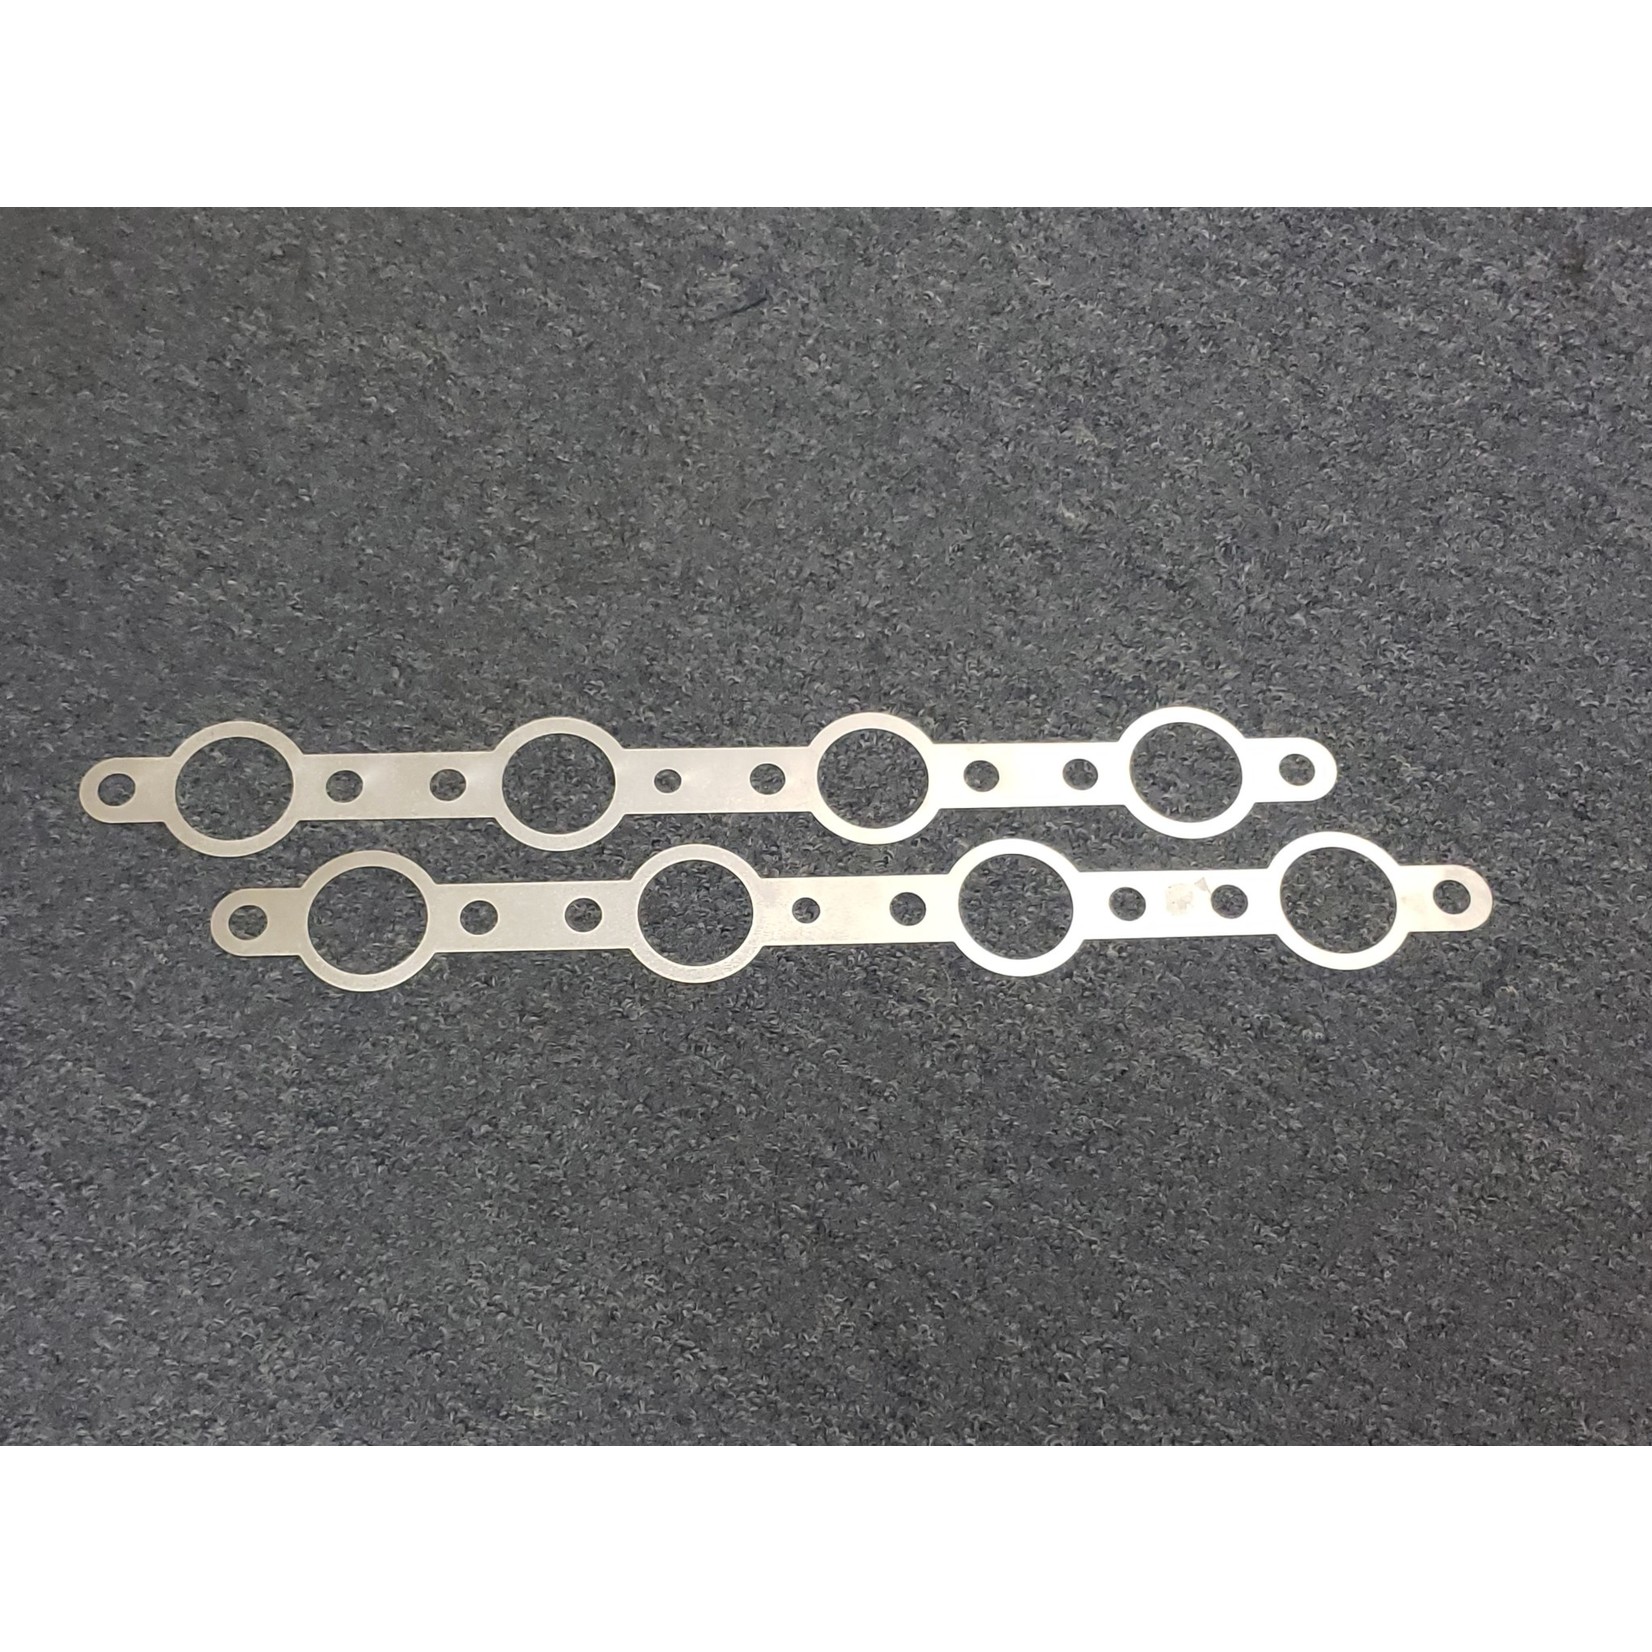 GBE FORD 7.3 POWERSTROKE STAINLESS EXHAUST MANIFOLD GASKETS - LASER CUT